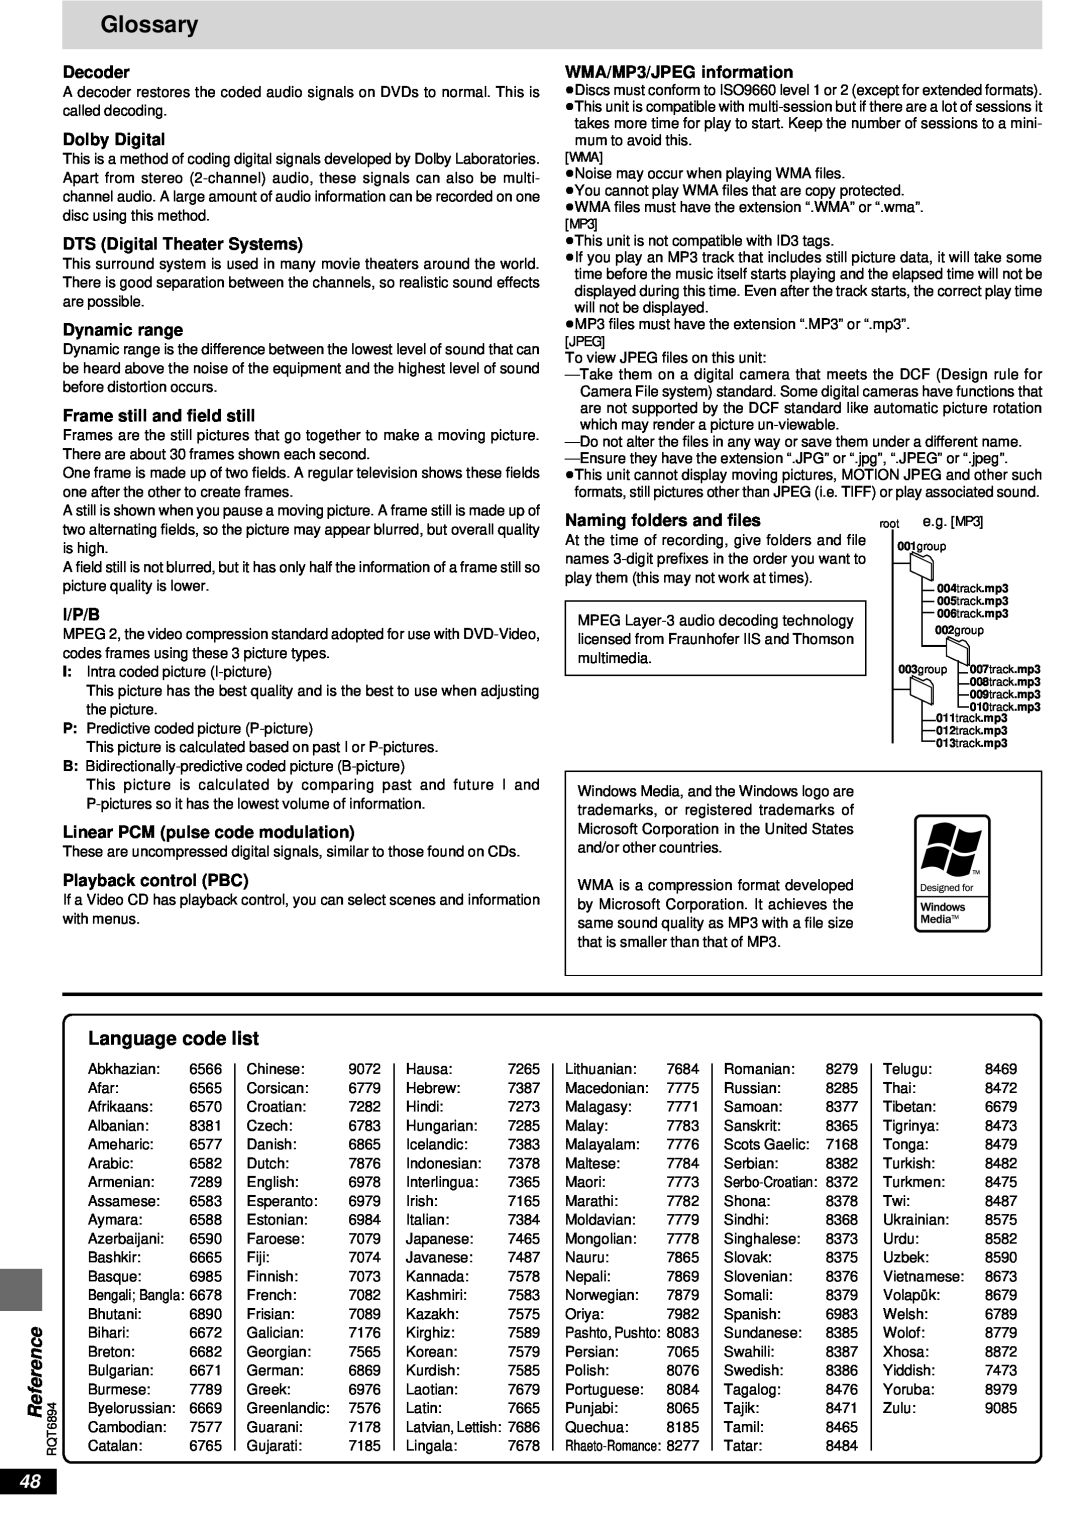 Technics SC-DV290 Glossary, Language code list, Reference, Decoder, Dolby Digital, DTS Digital Theater Systems, I/P/B 